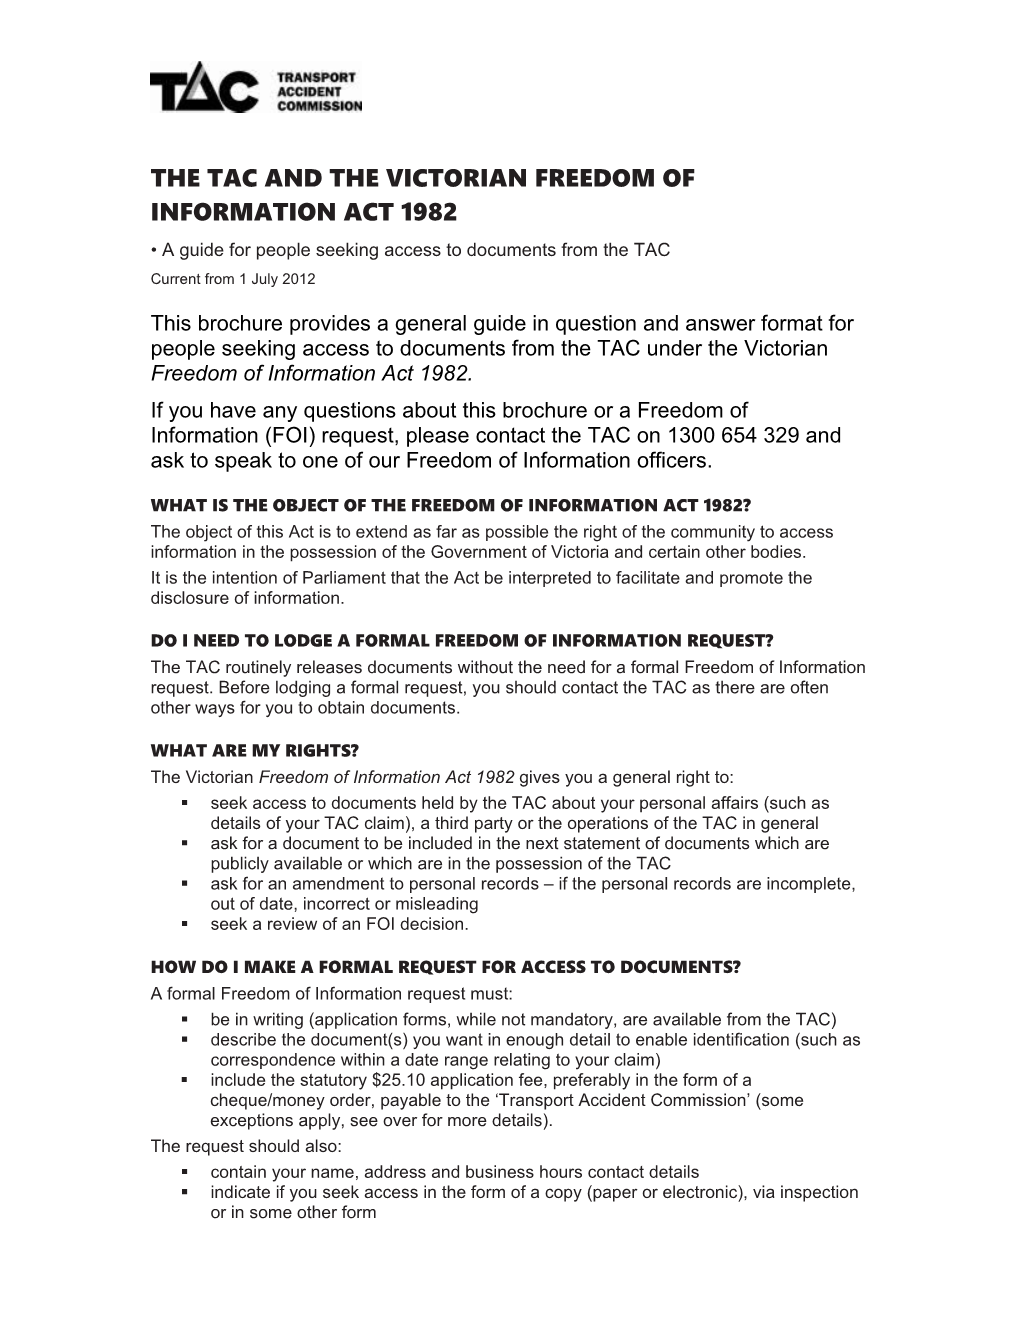 The Tac and the Victorian Freedom of Information Act 1982